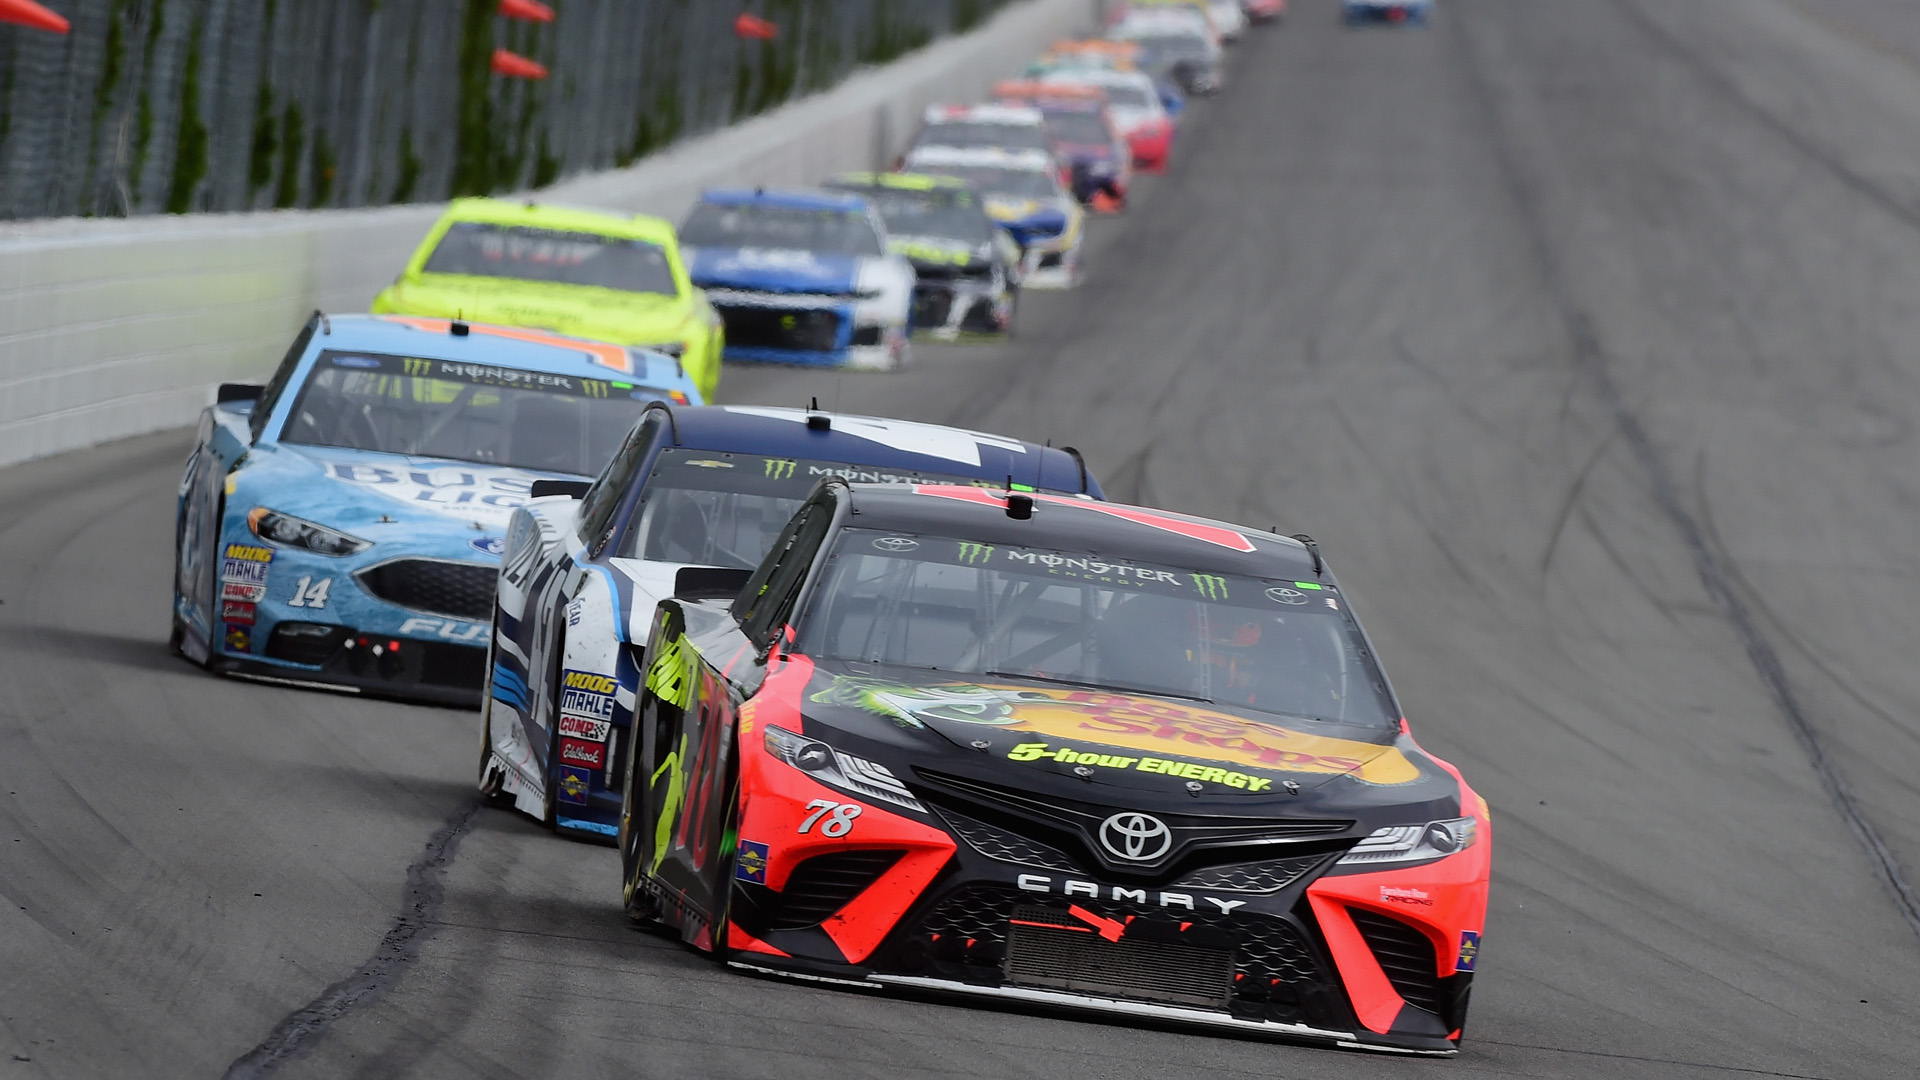 For the second time in three attempts Martin Truex Jr. claimed victory at the Pocono 400.